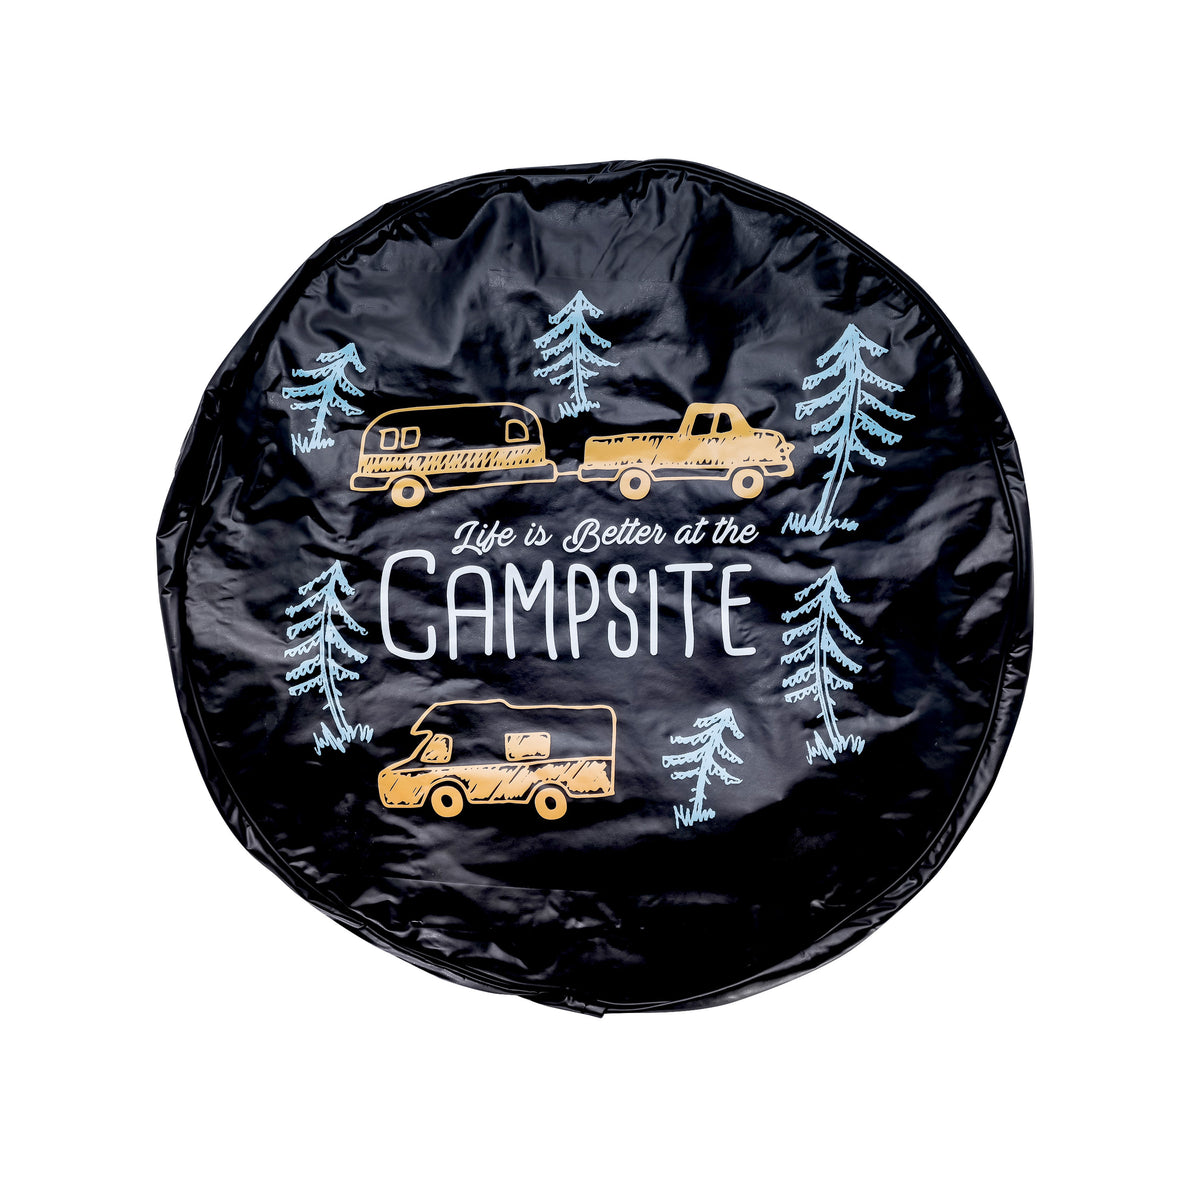 Camco 53292 "Life is Better at the Campsite" Spare Tire Cover - Size J (Up to 27" Tire), RV Sketch